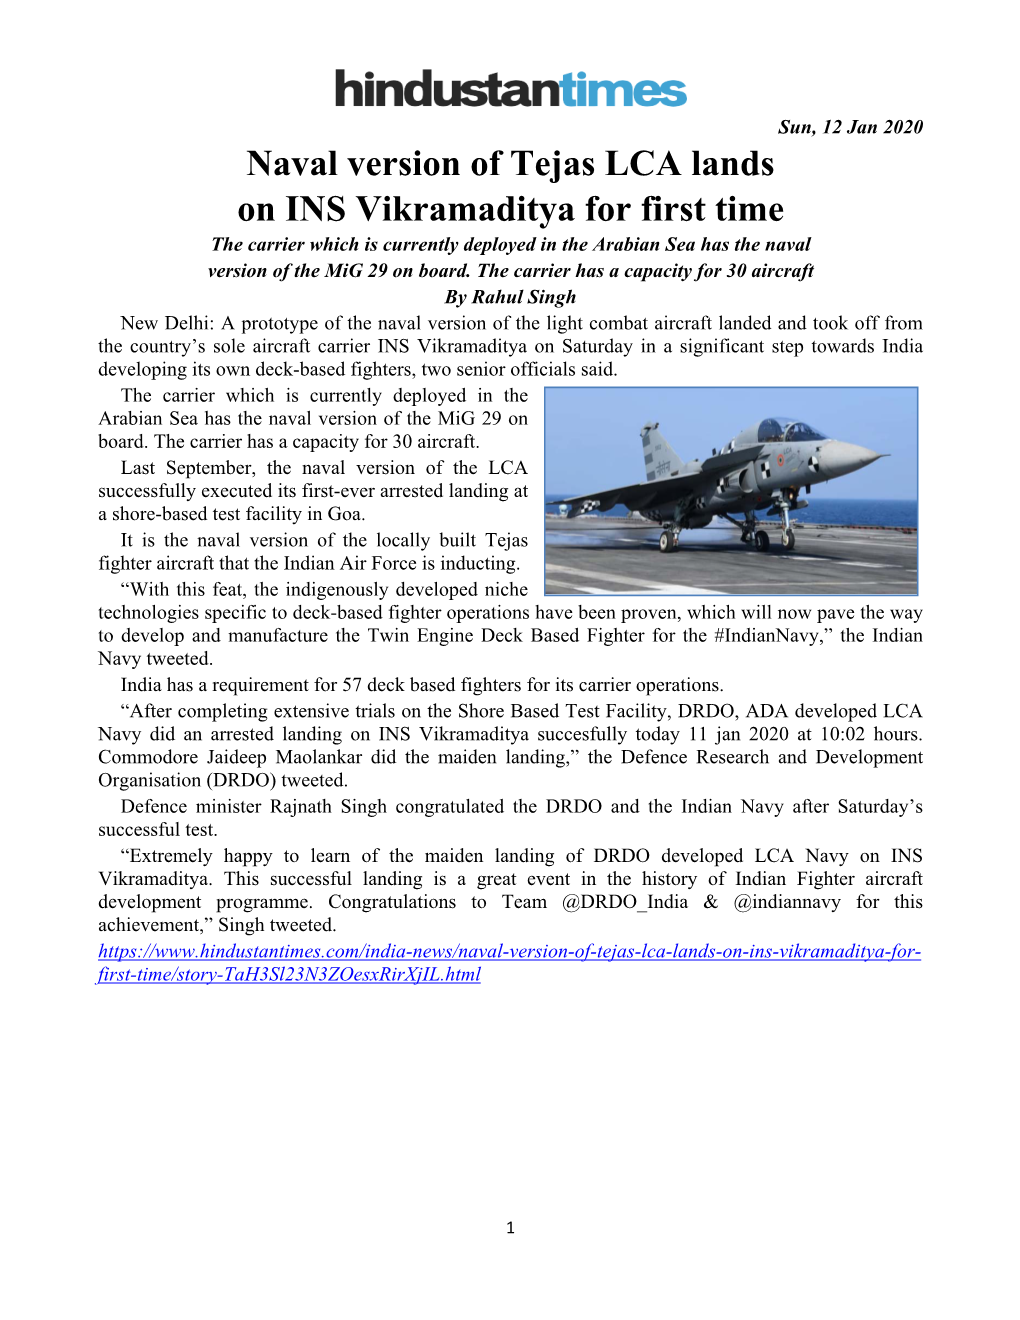 Naval Version of Tejas LCA Lands on INS Vikramaditya for First Time